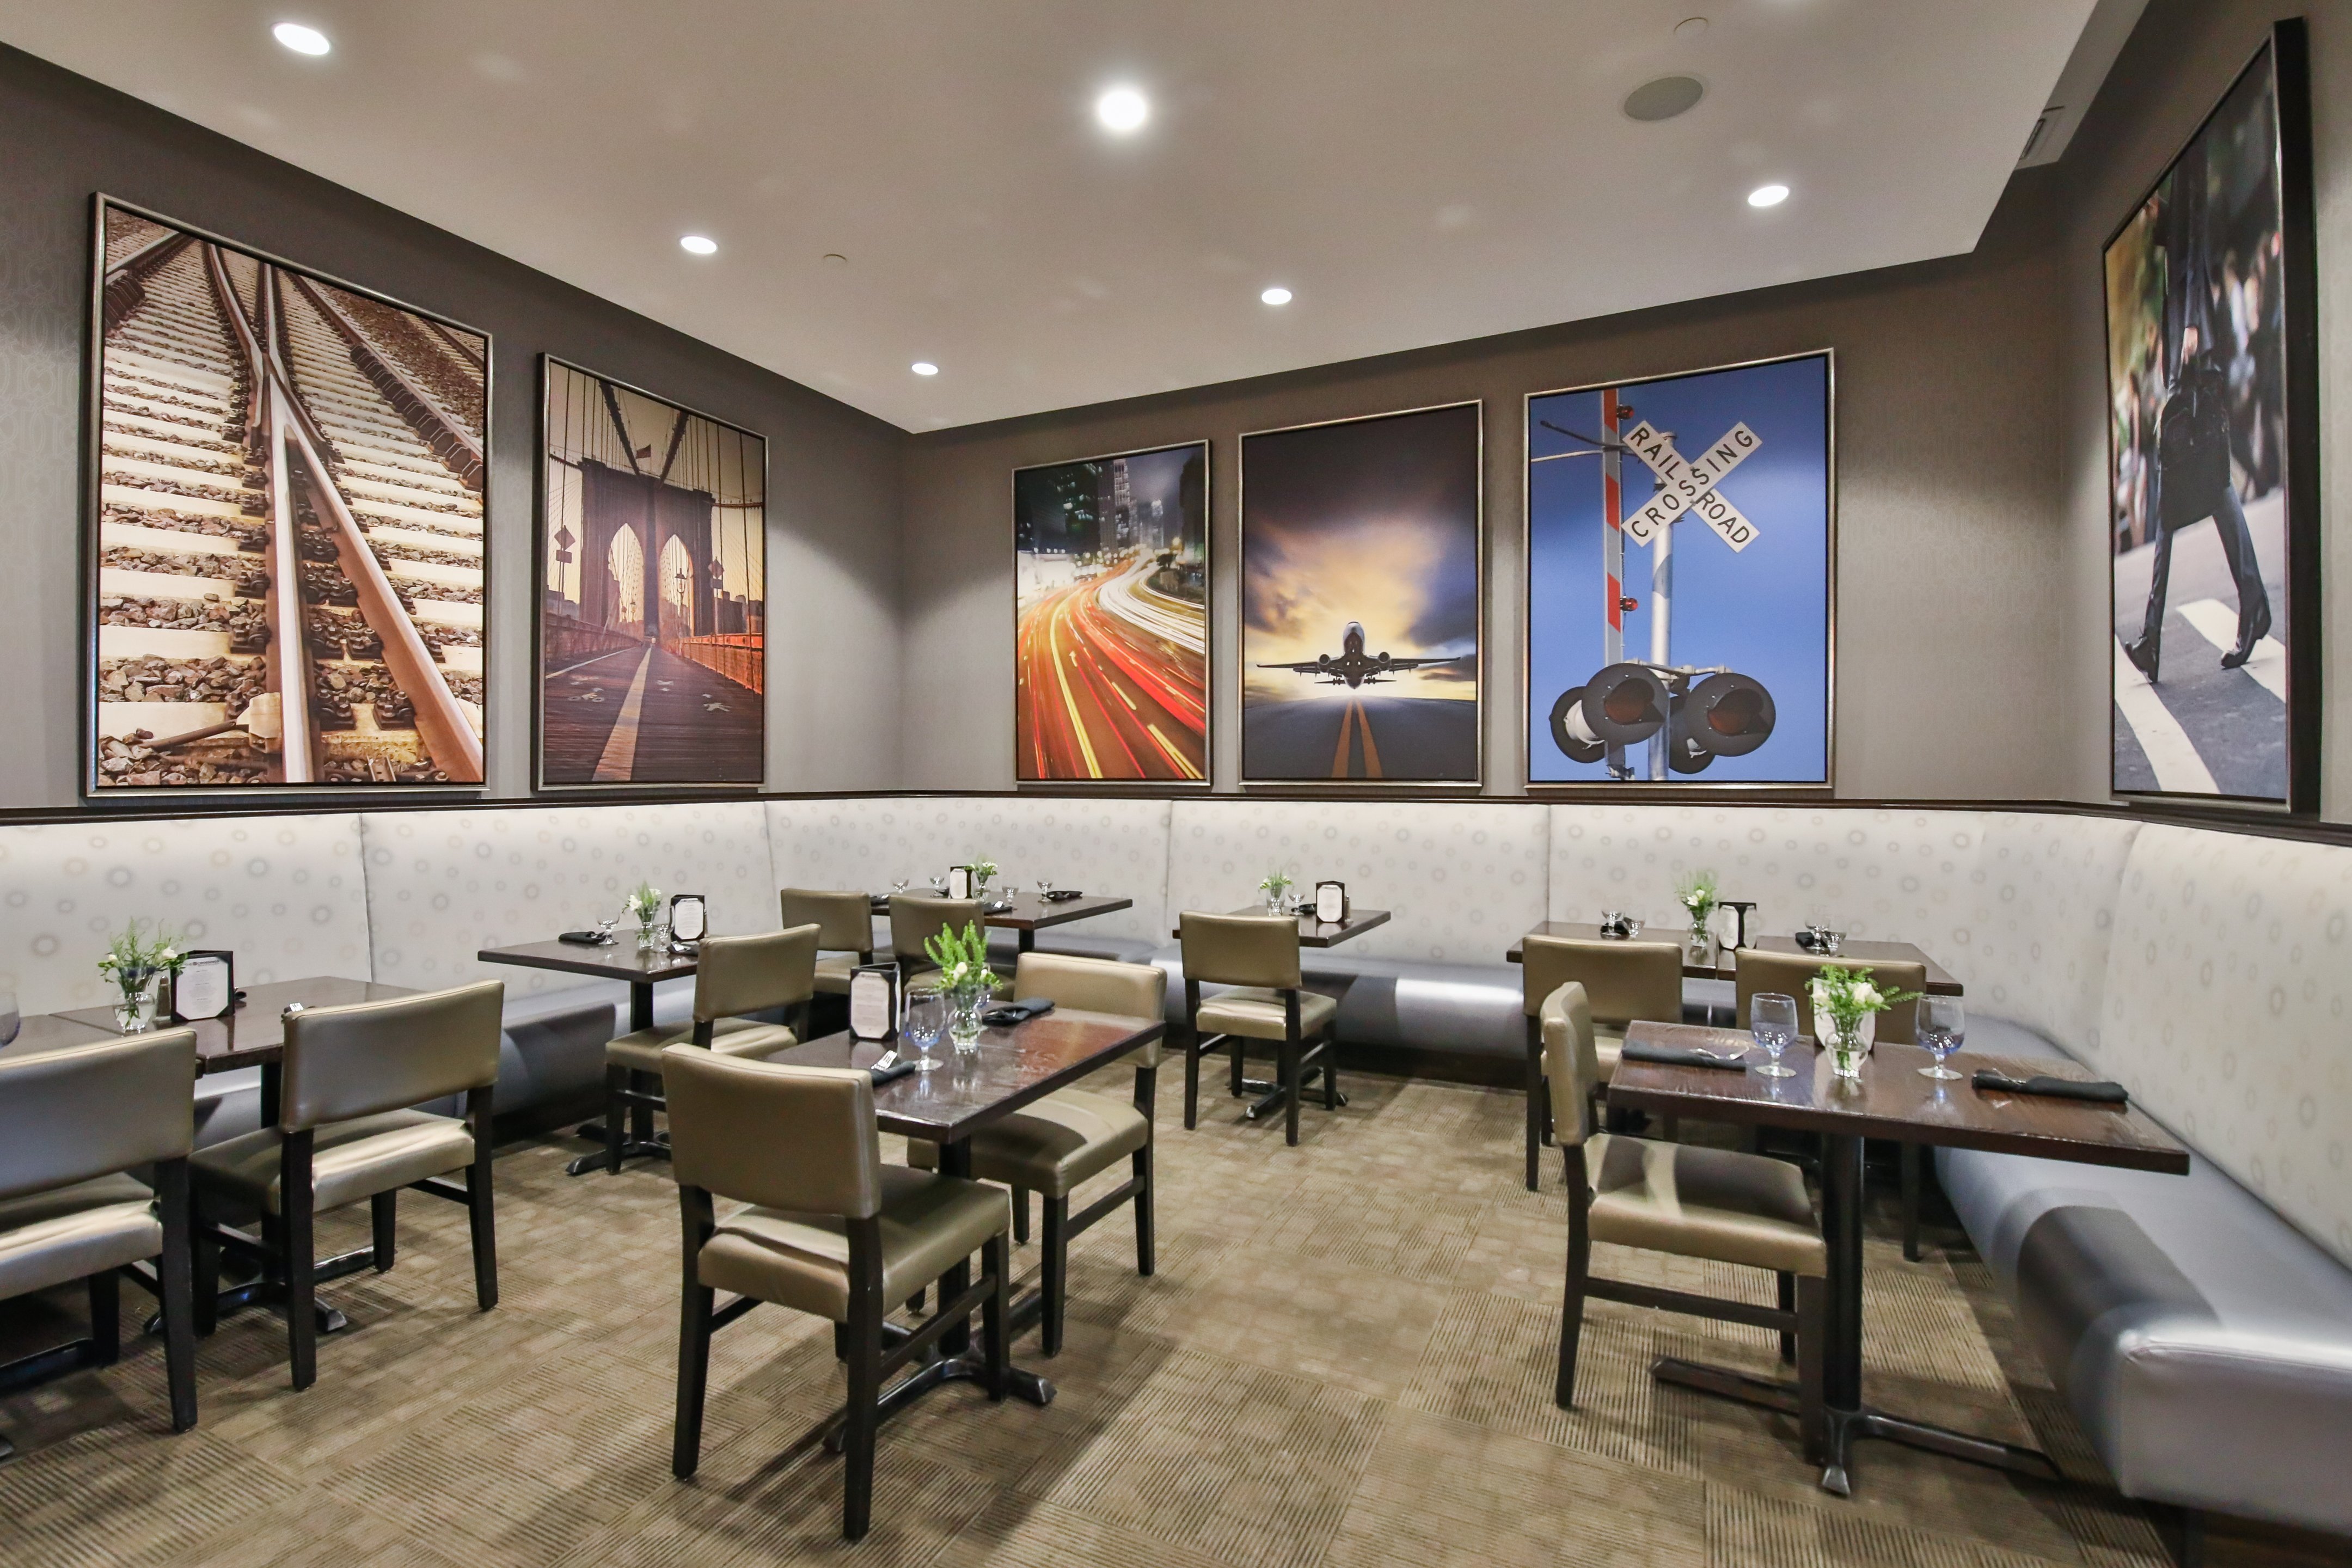 The Crossings Restaurant provides delectable meal options.